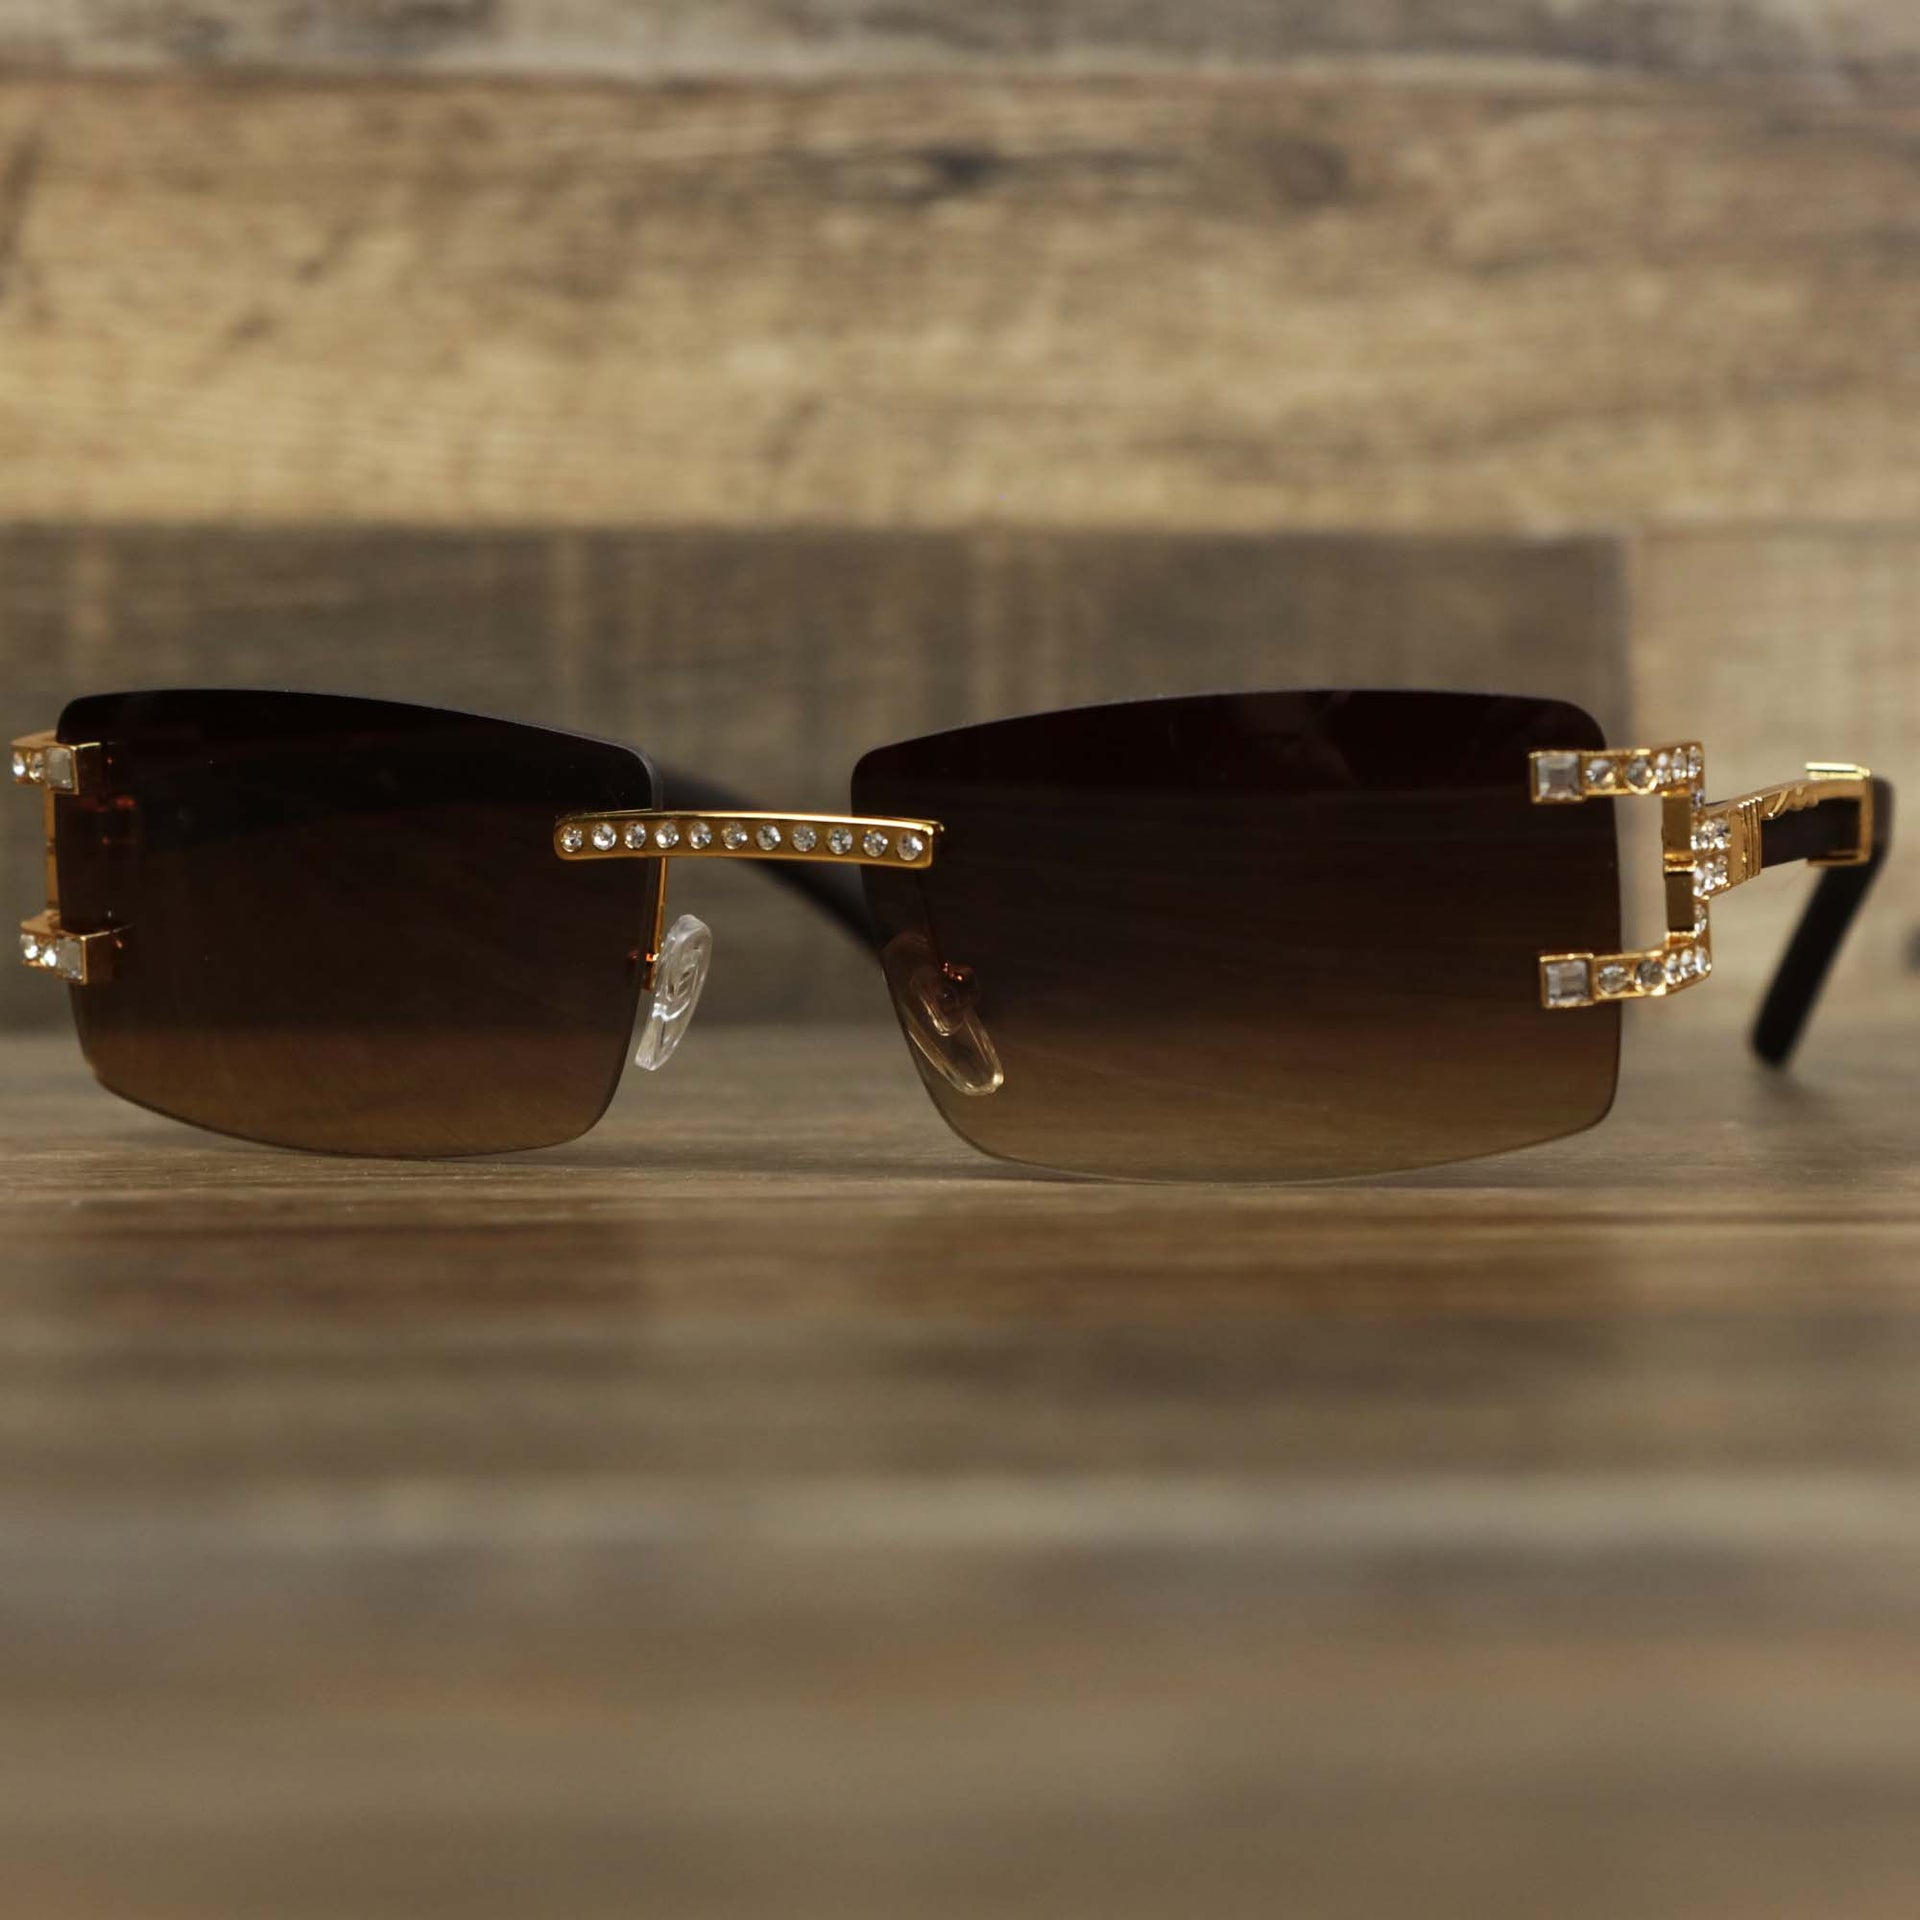 The Rectangle Frames Brown Gradient Lens Flooded Sunglasses with Gold Frame